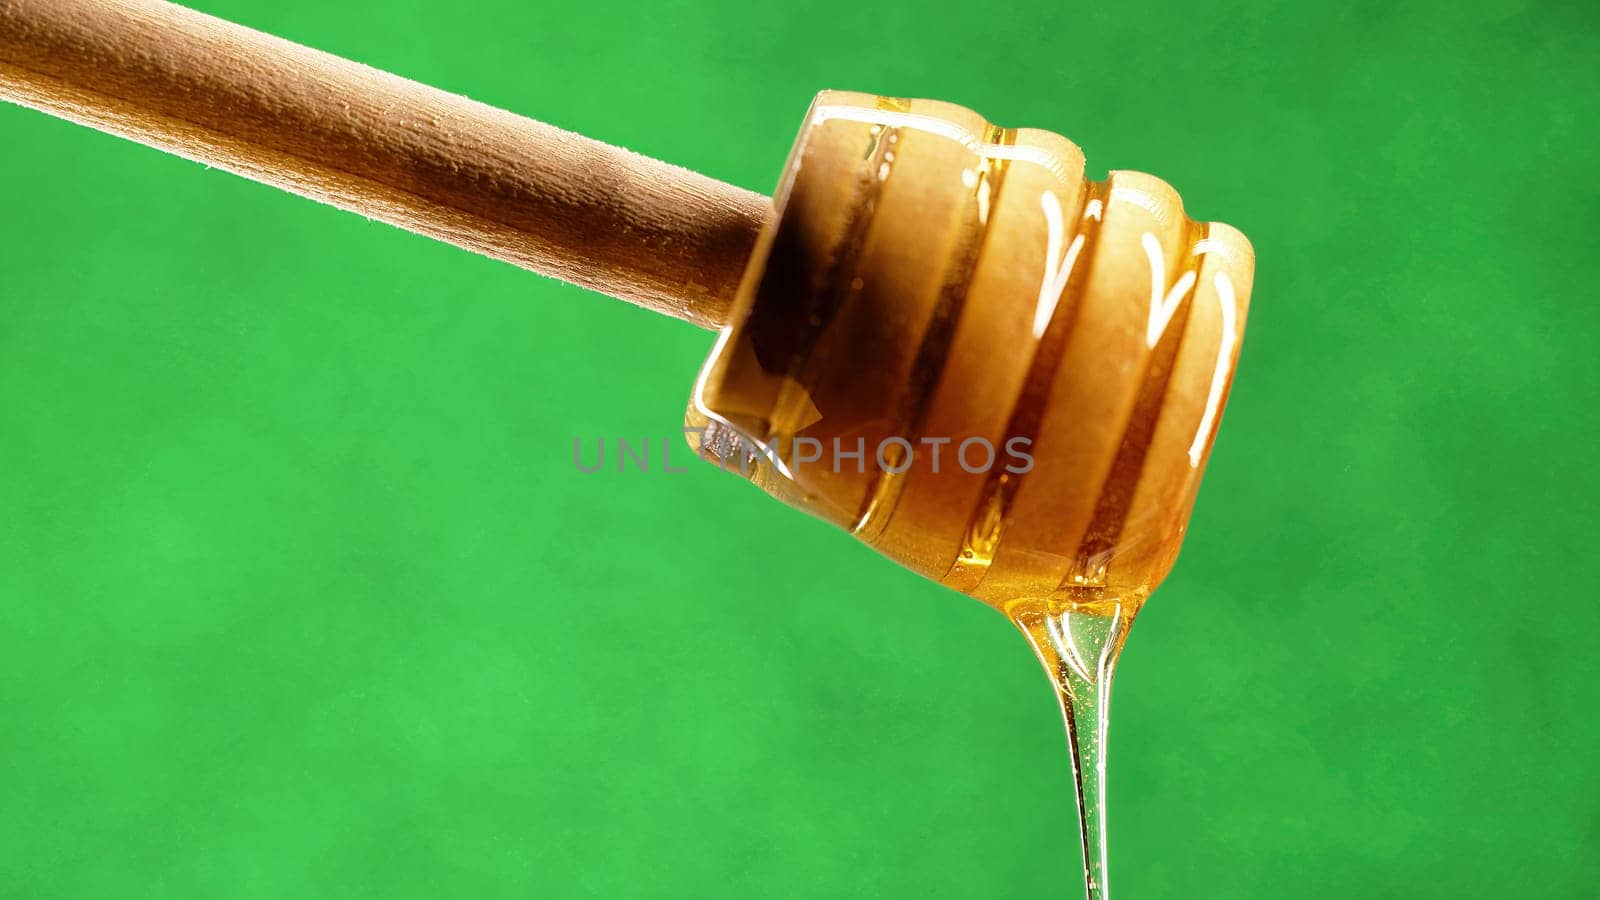 Organic honey flows from wooden dipper stick on green background. Apiary by kristina_kokhanova